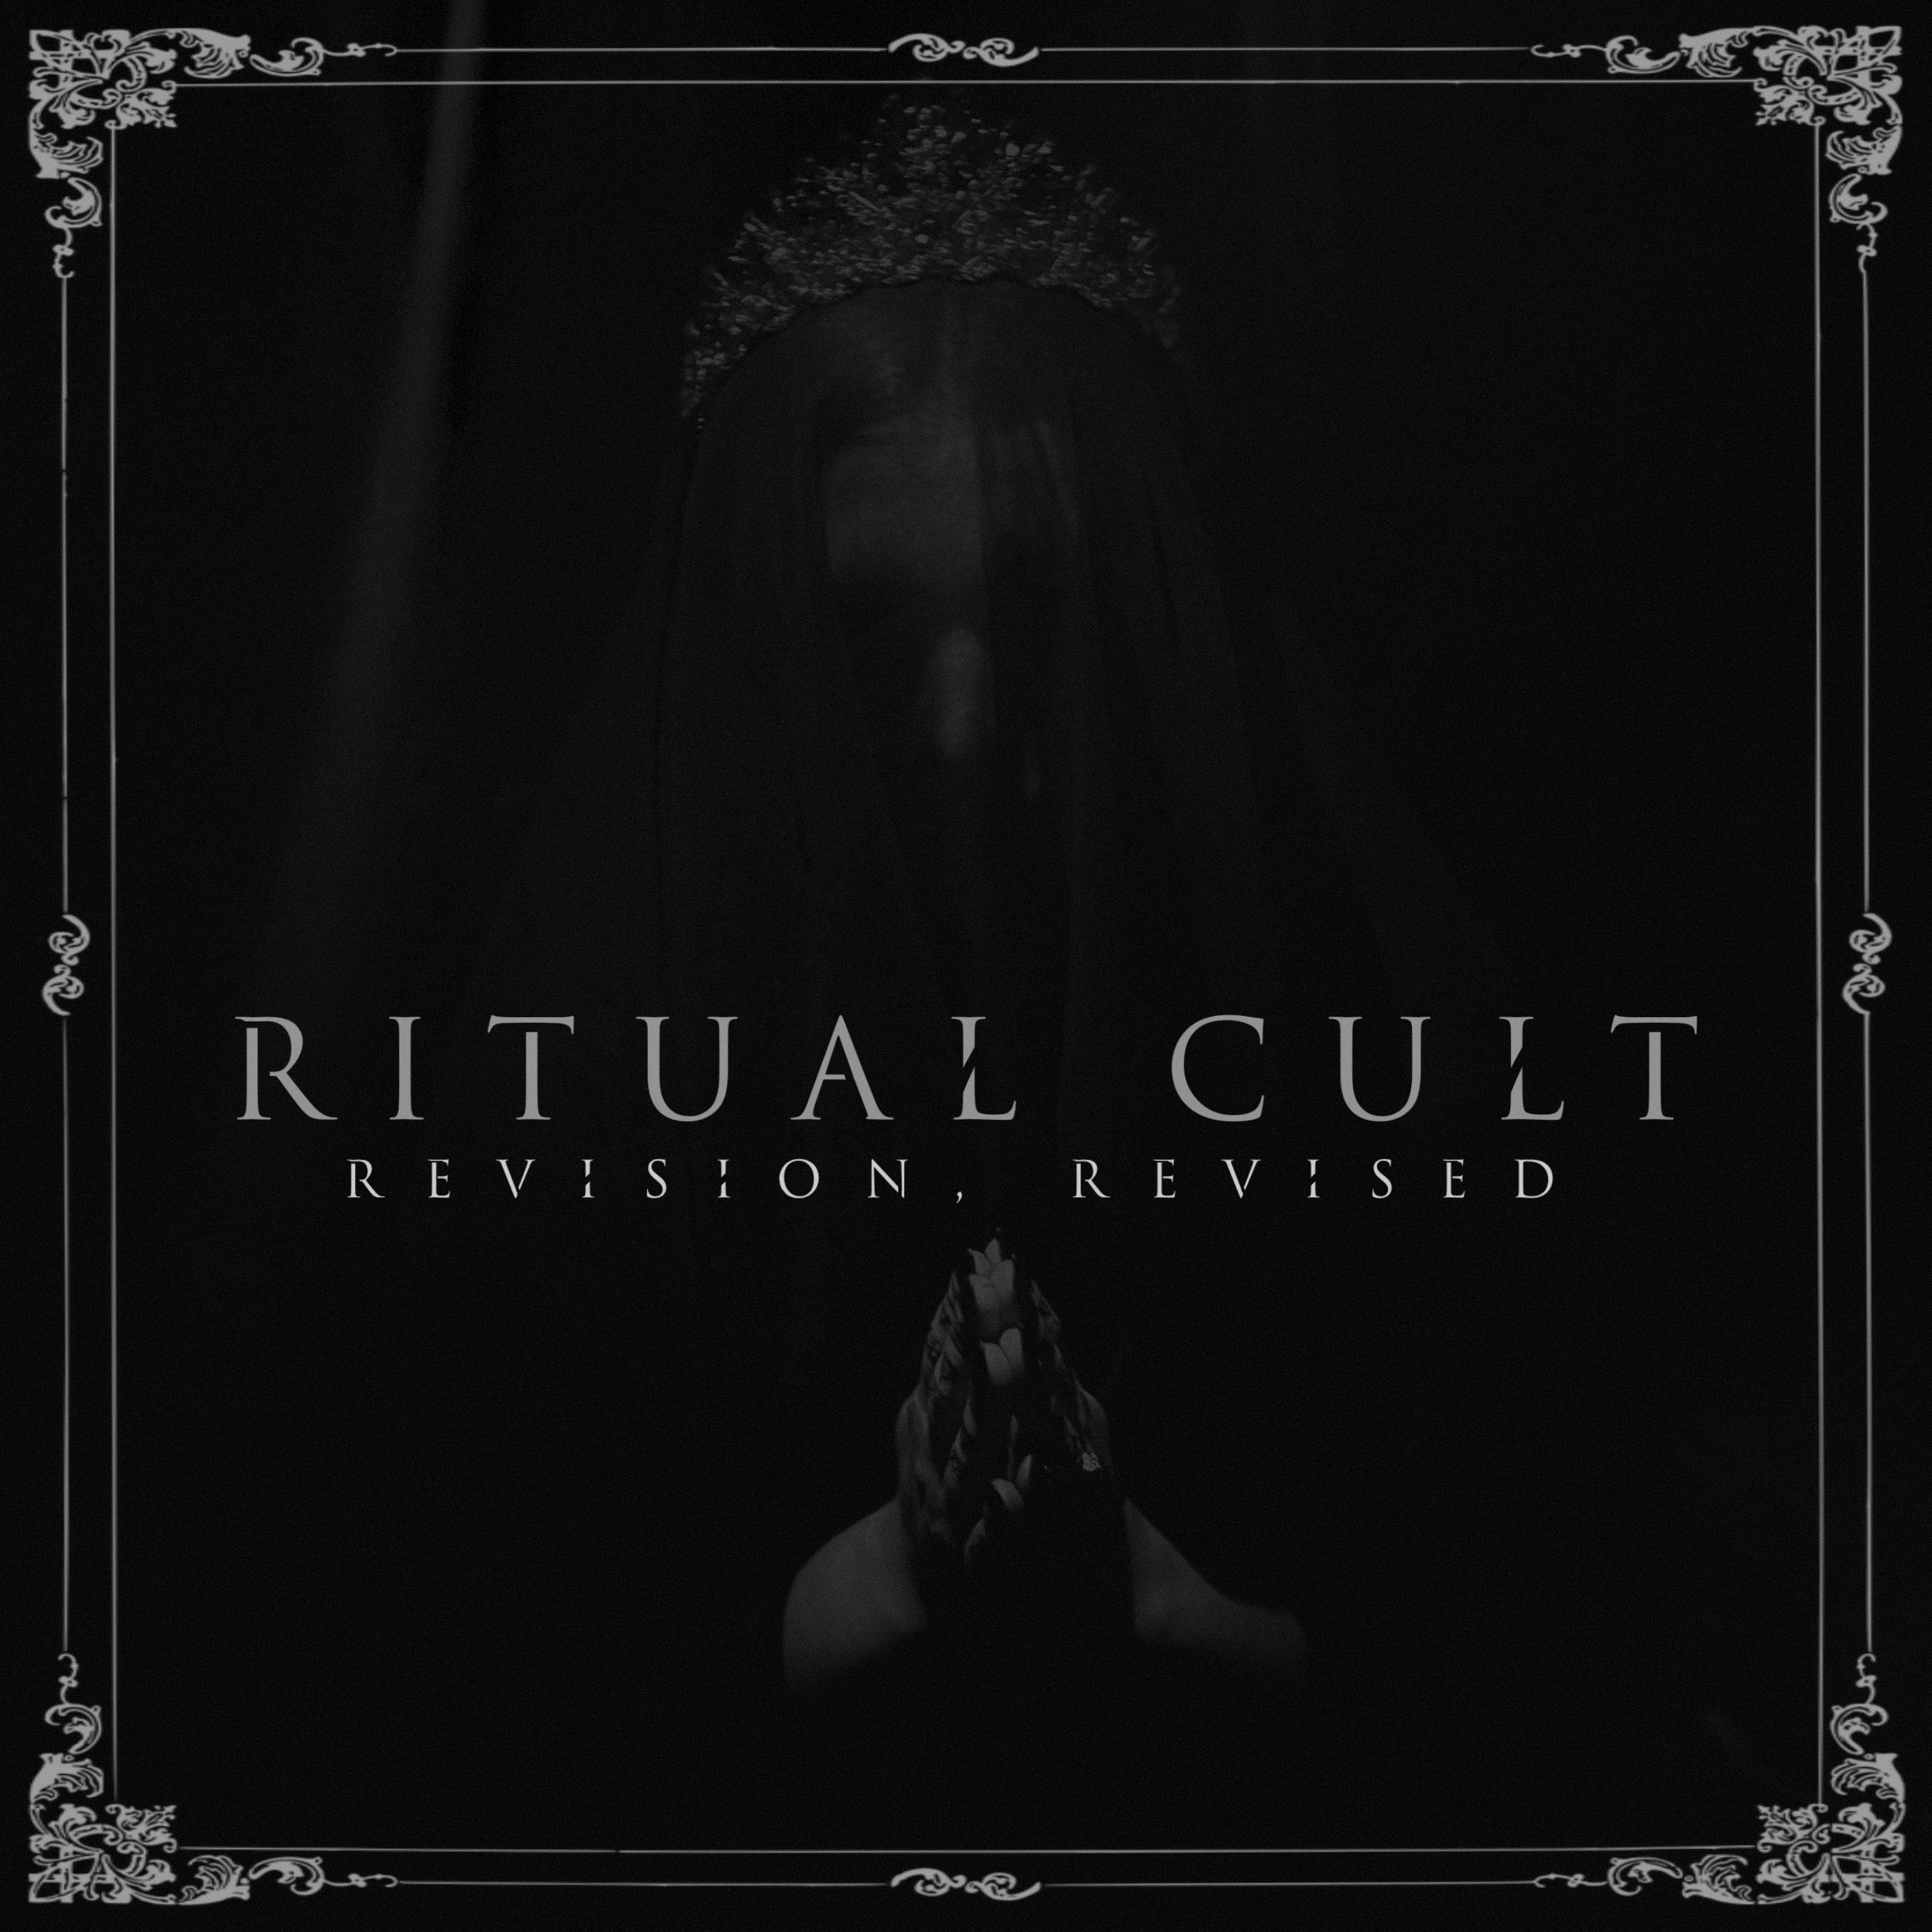 Revision, Revised - Ritual Cult